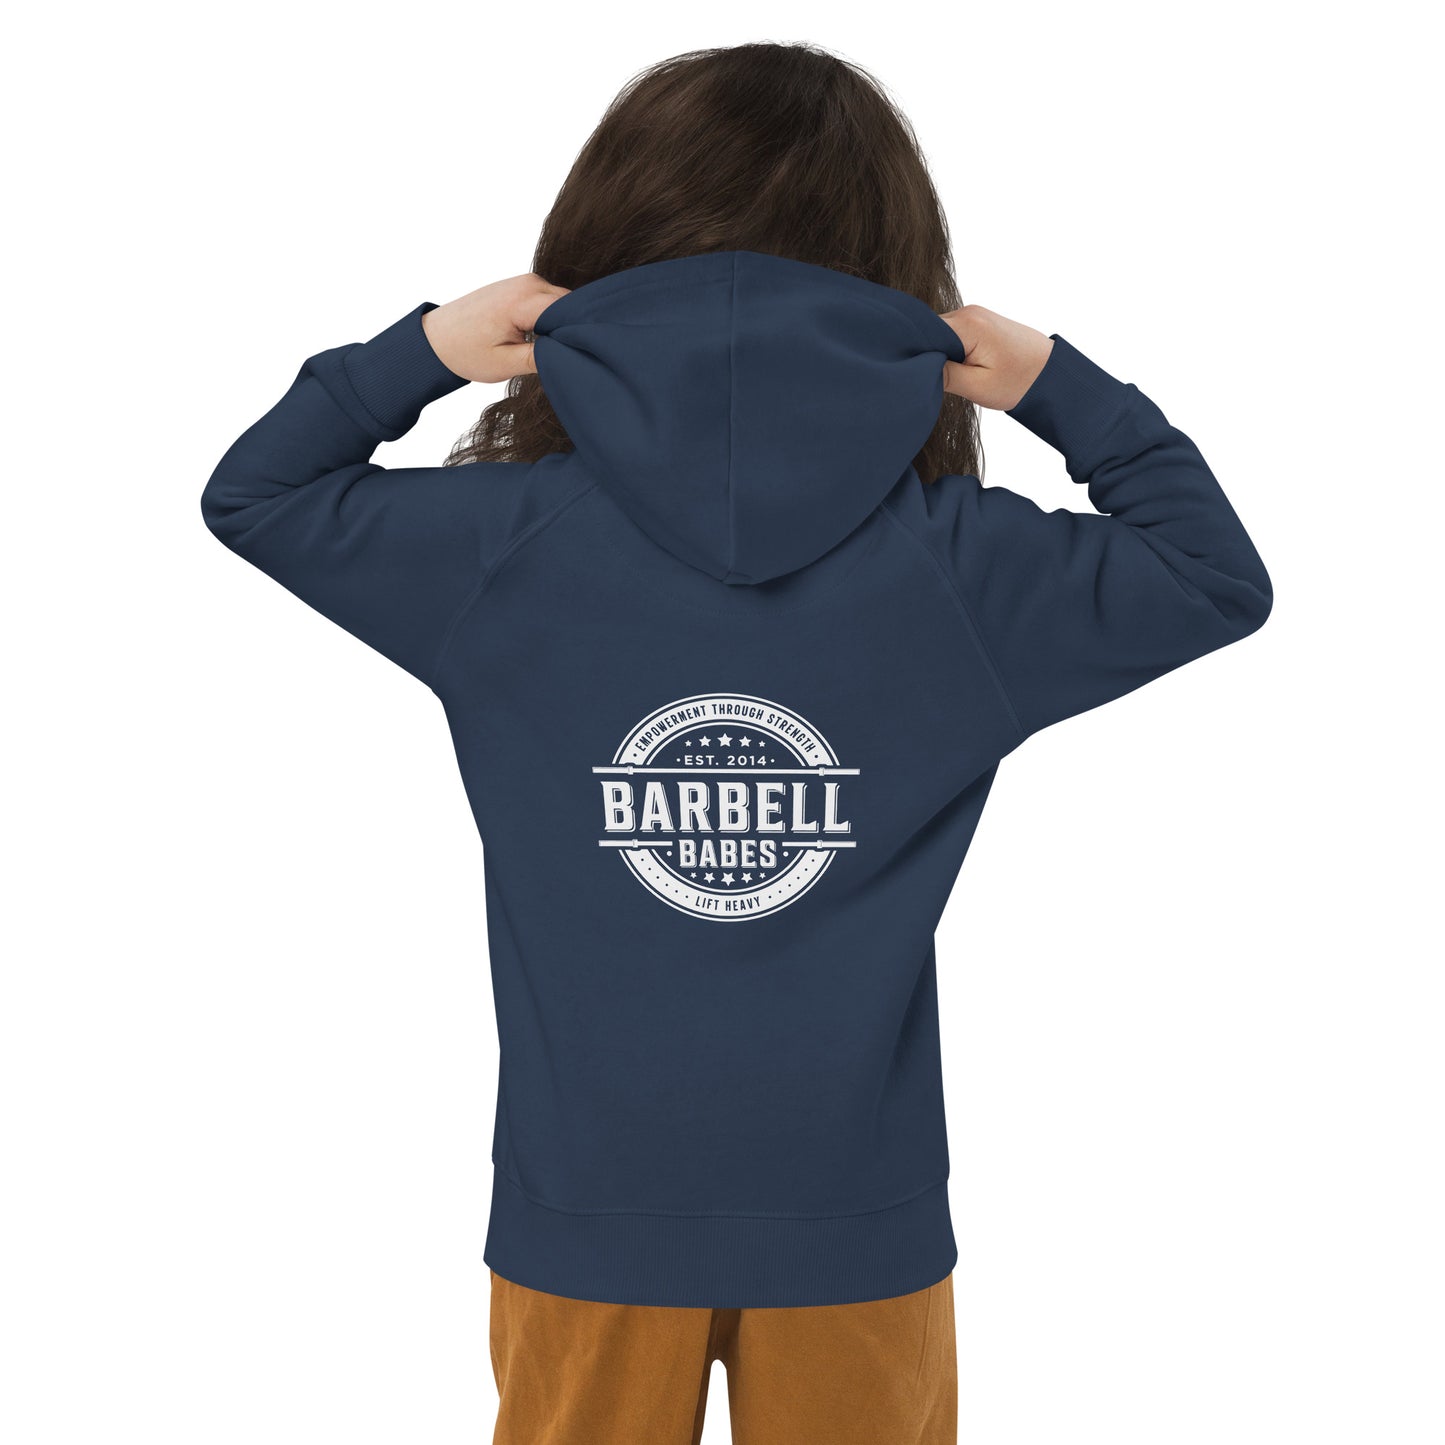 Kids: B is for Barbell Babes